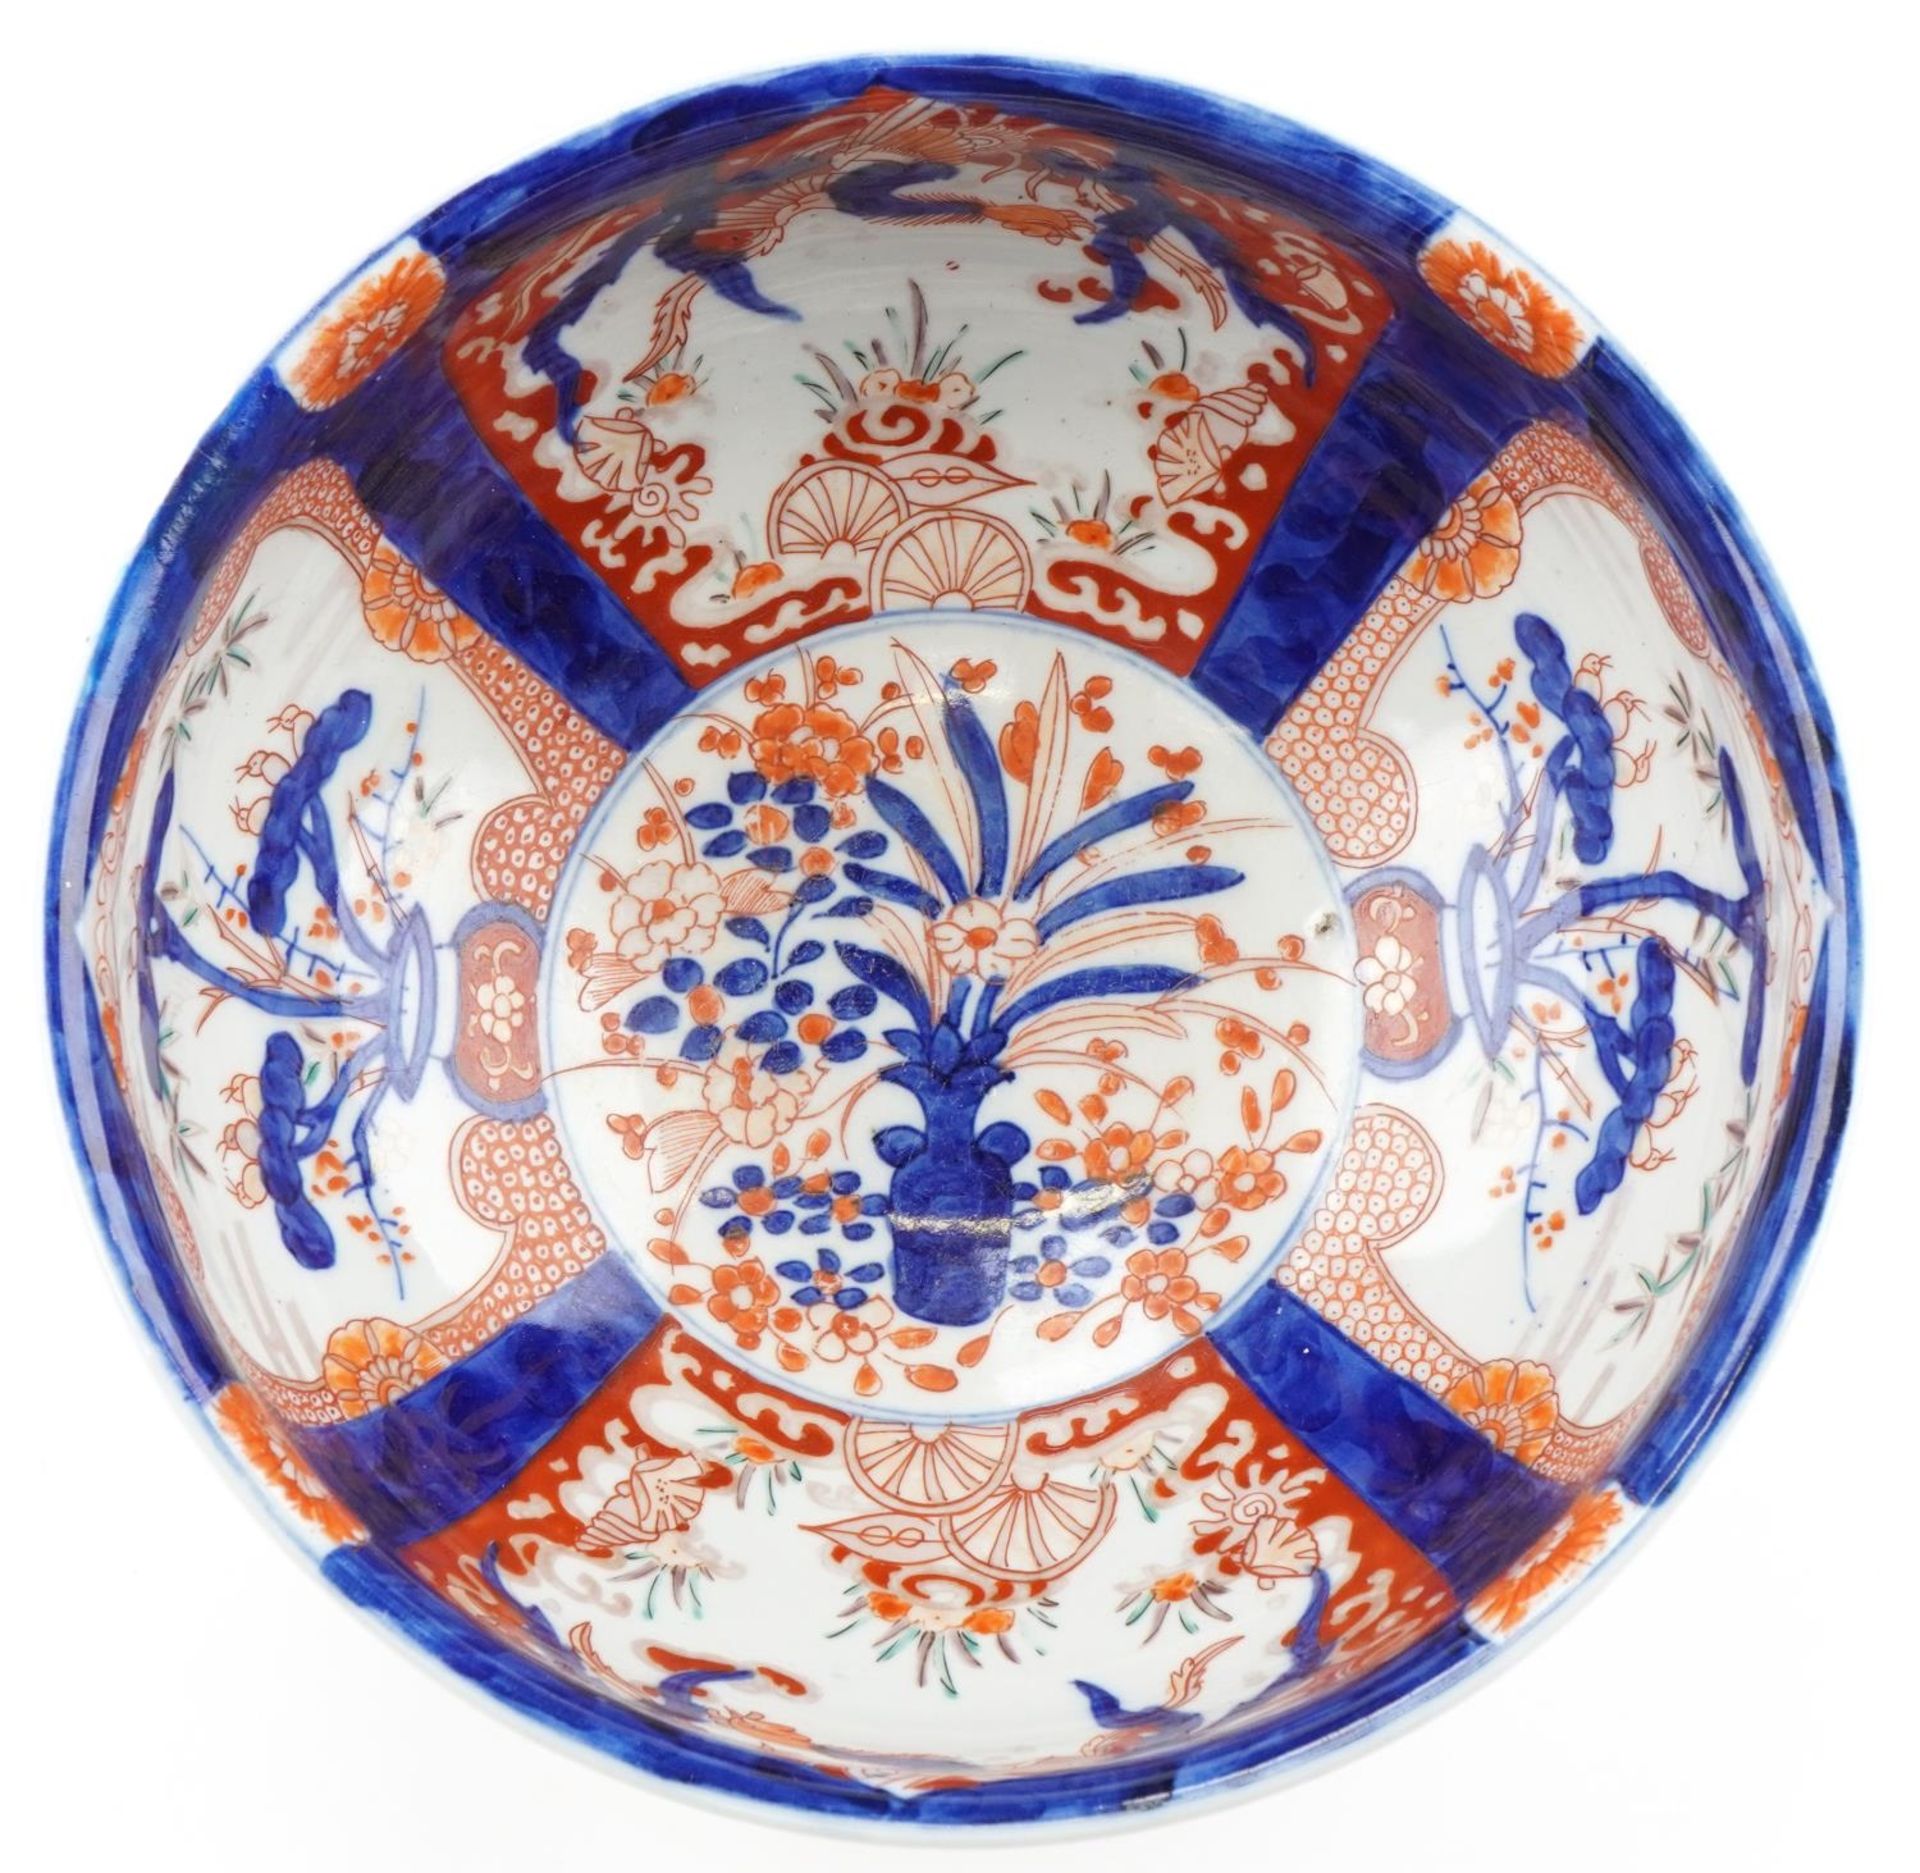 Japanese Imari porcelain bowl hand painted with panels of flowers, 25cm in diameter - Image 5 of 6